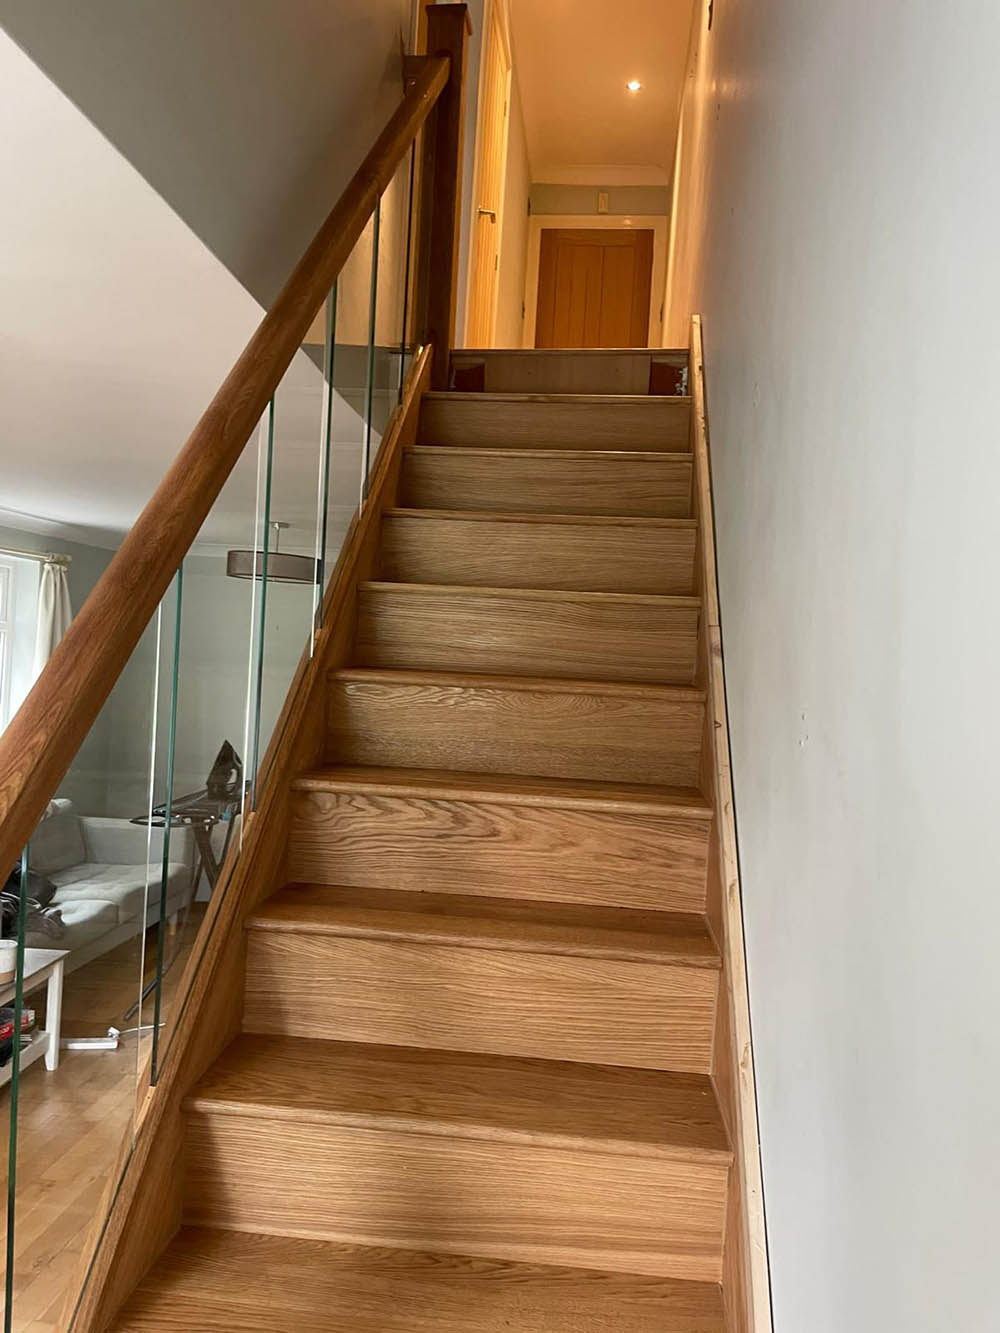 Wooden staircase with glass panels